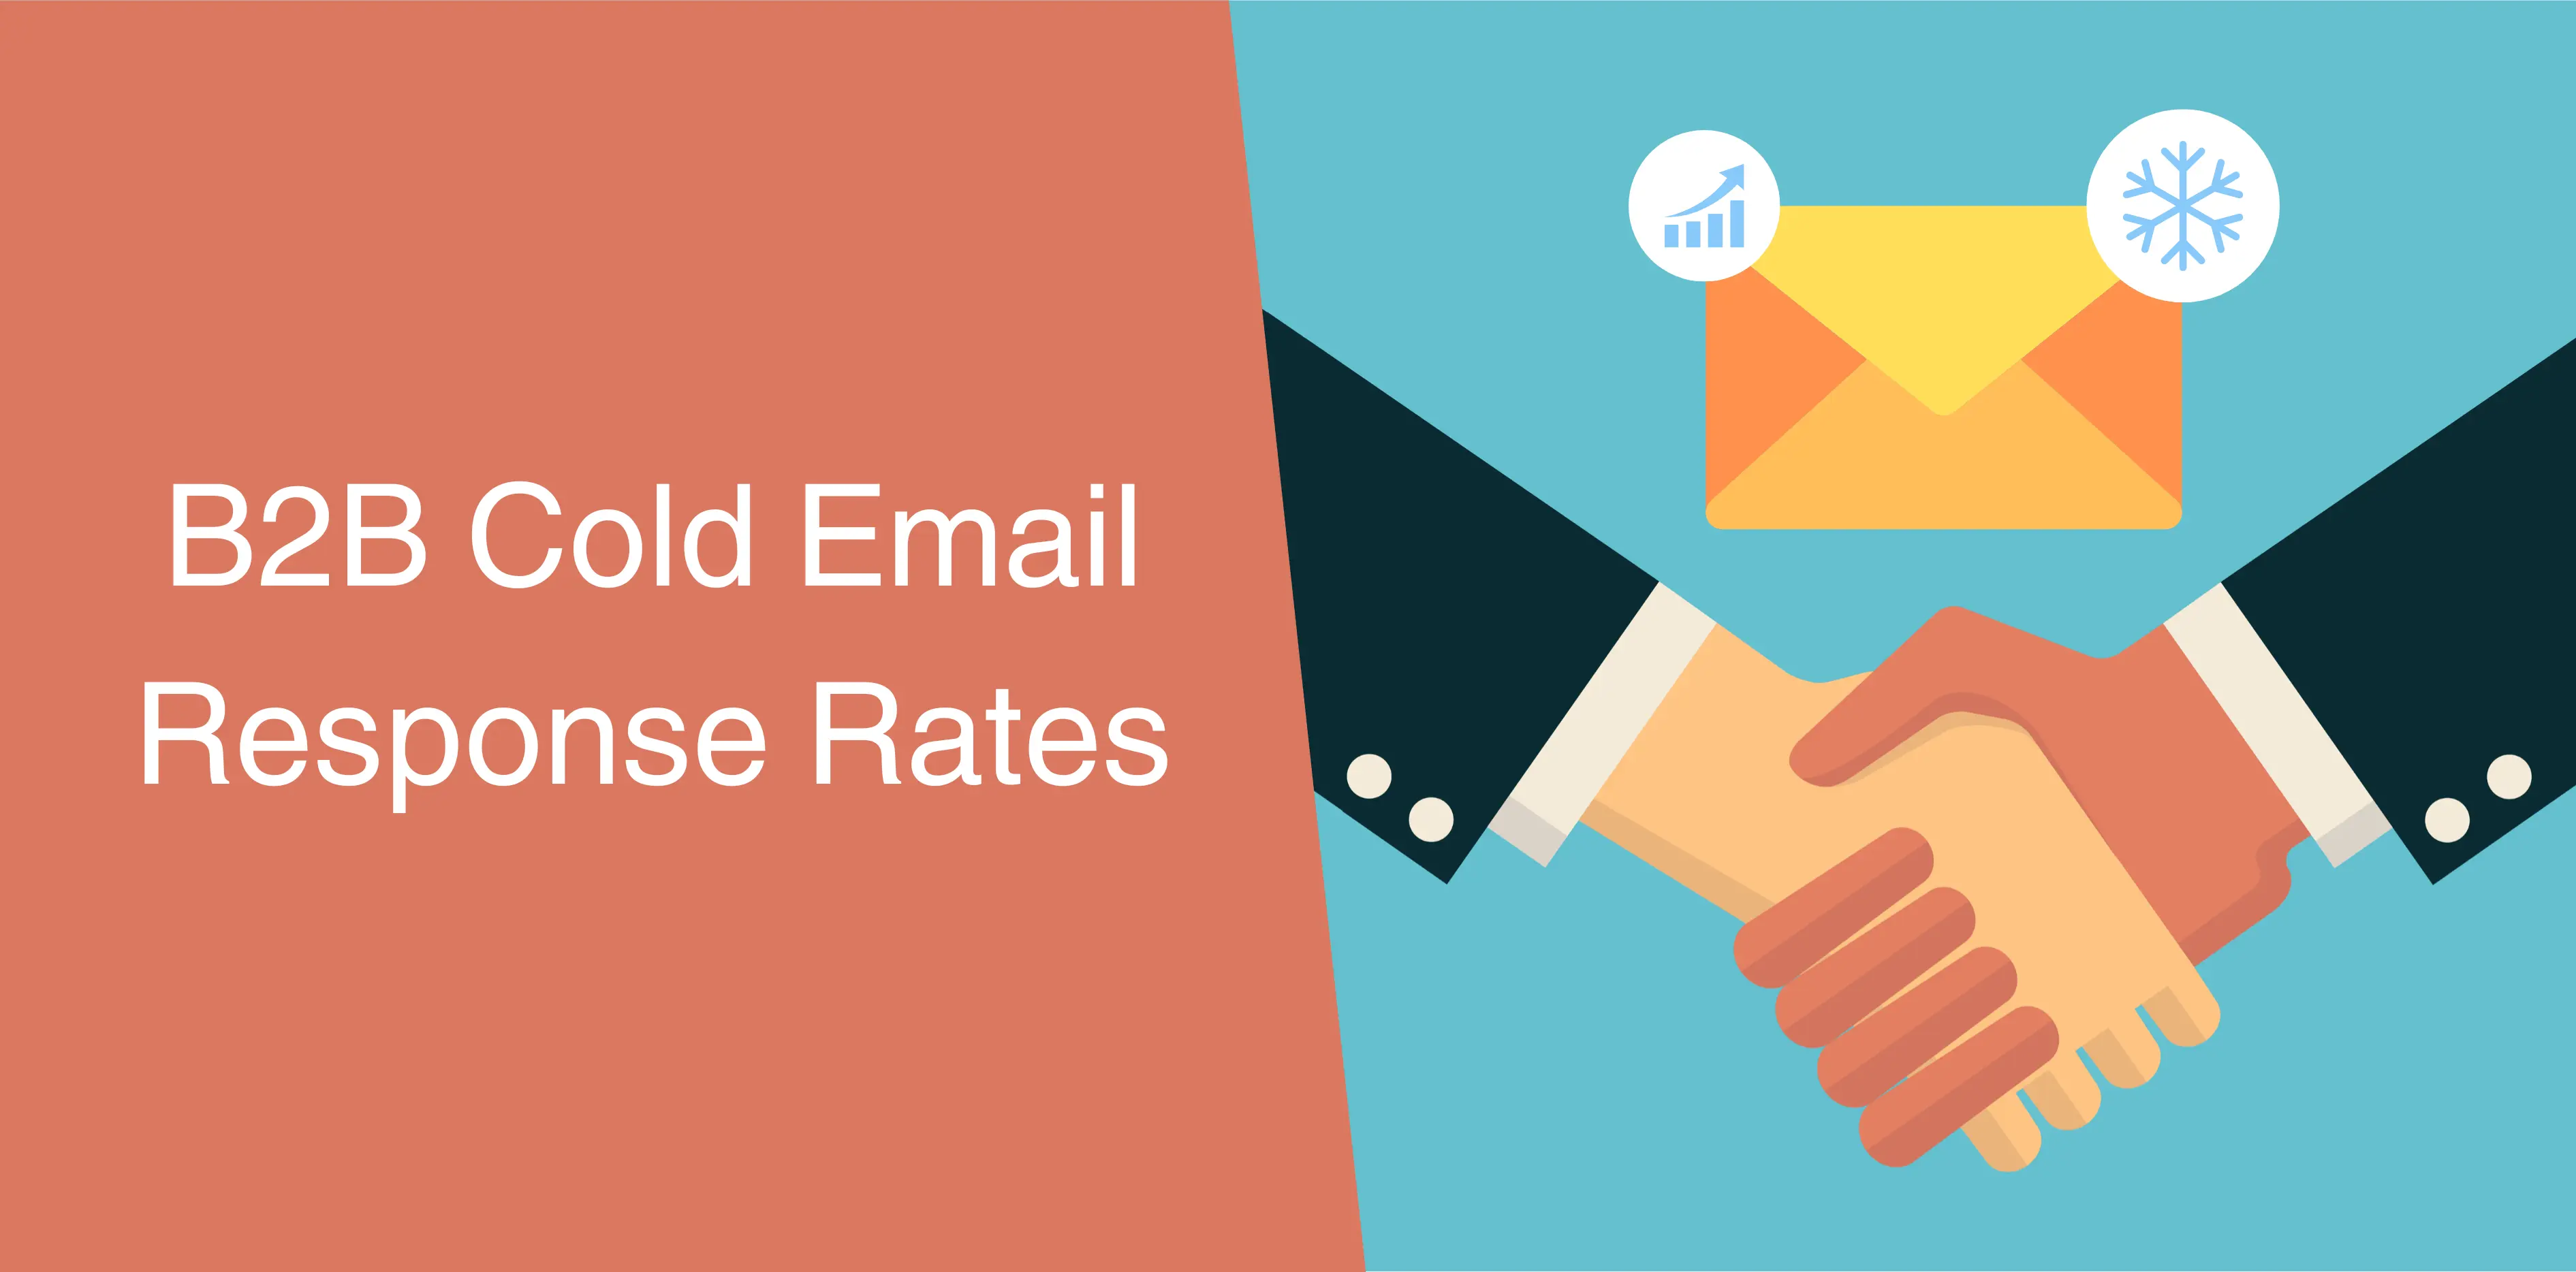 B2B Cold Email Response Rates